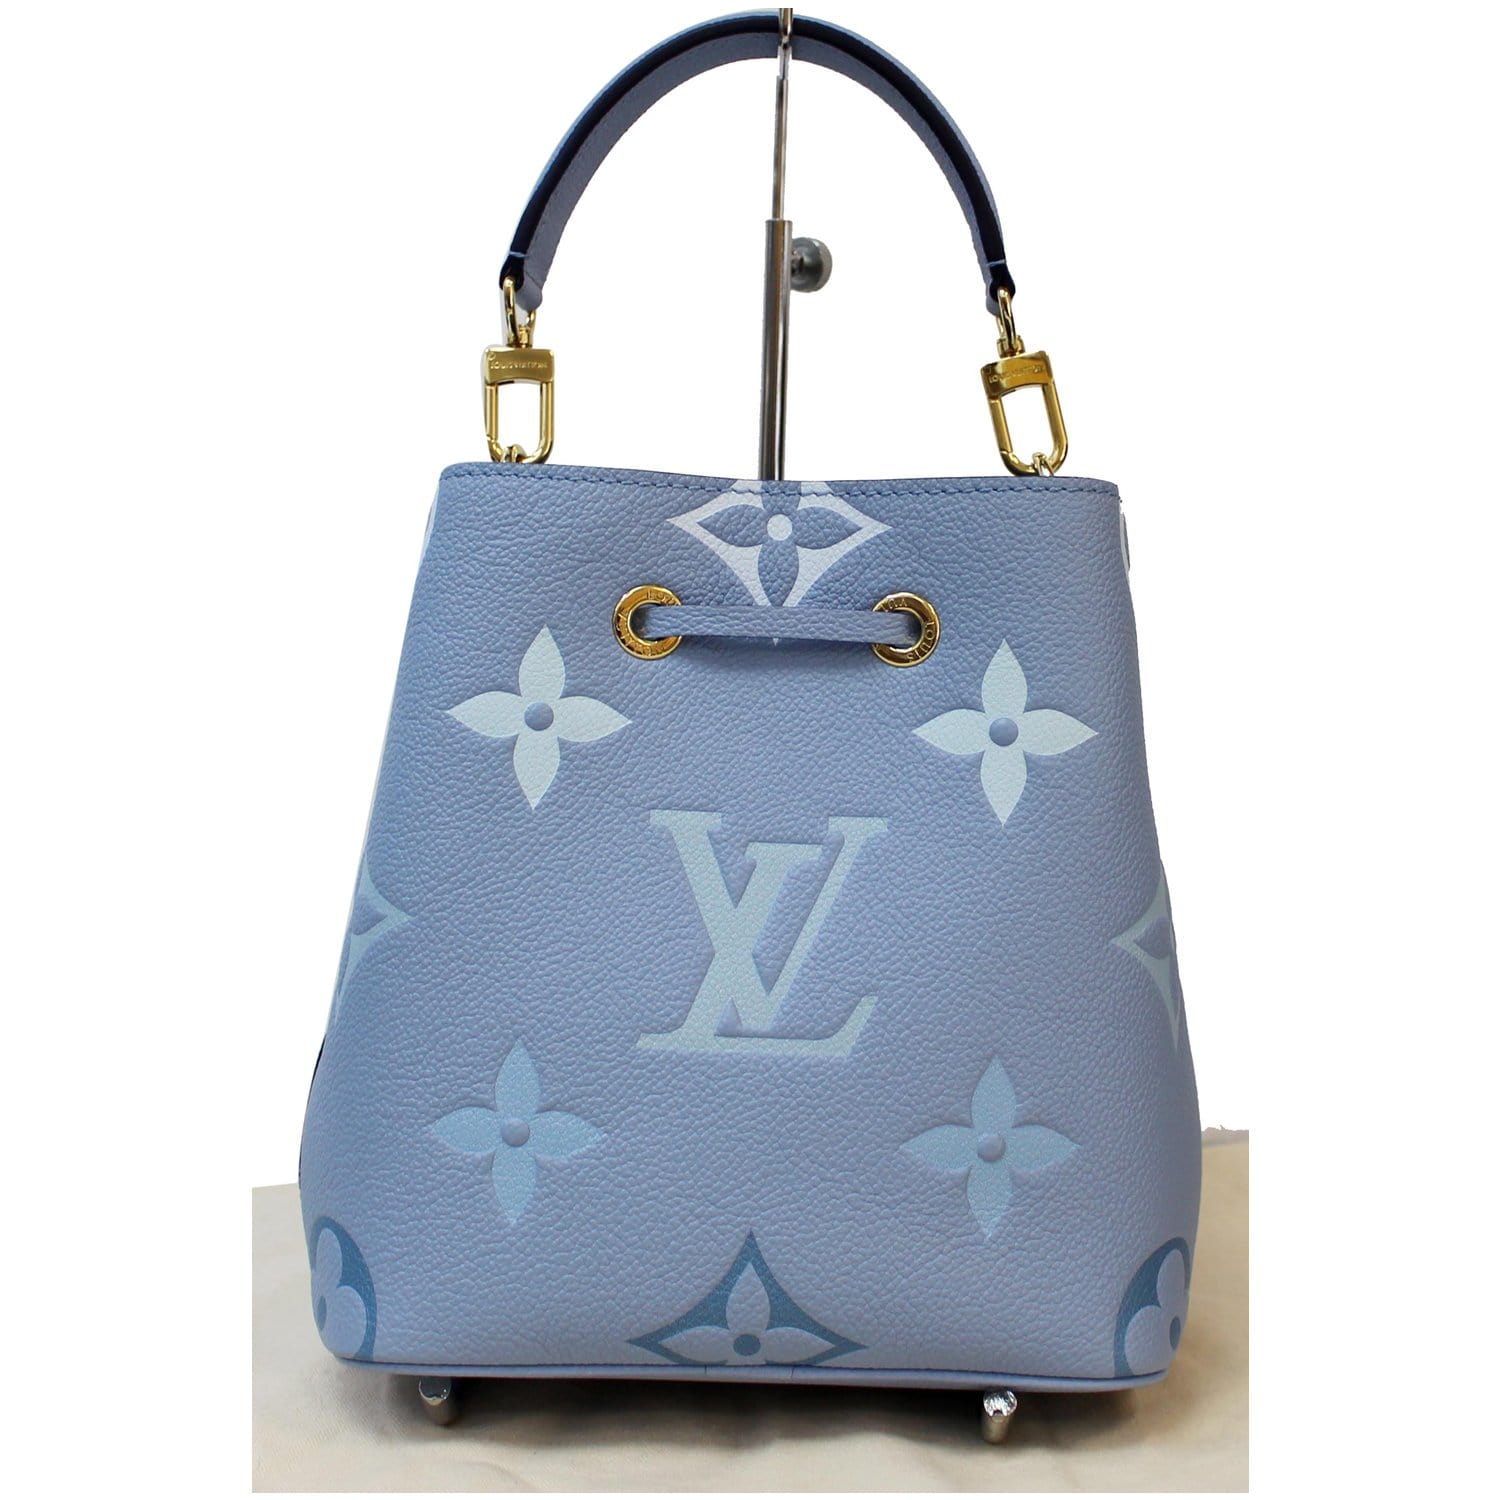 LOUIS VUITTON Empreinte Monogram Giant By The Pool Neonoe BB in Cream and  Saffron. This classic bucket-style shoulder bag features…